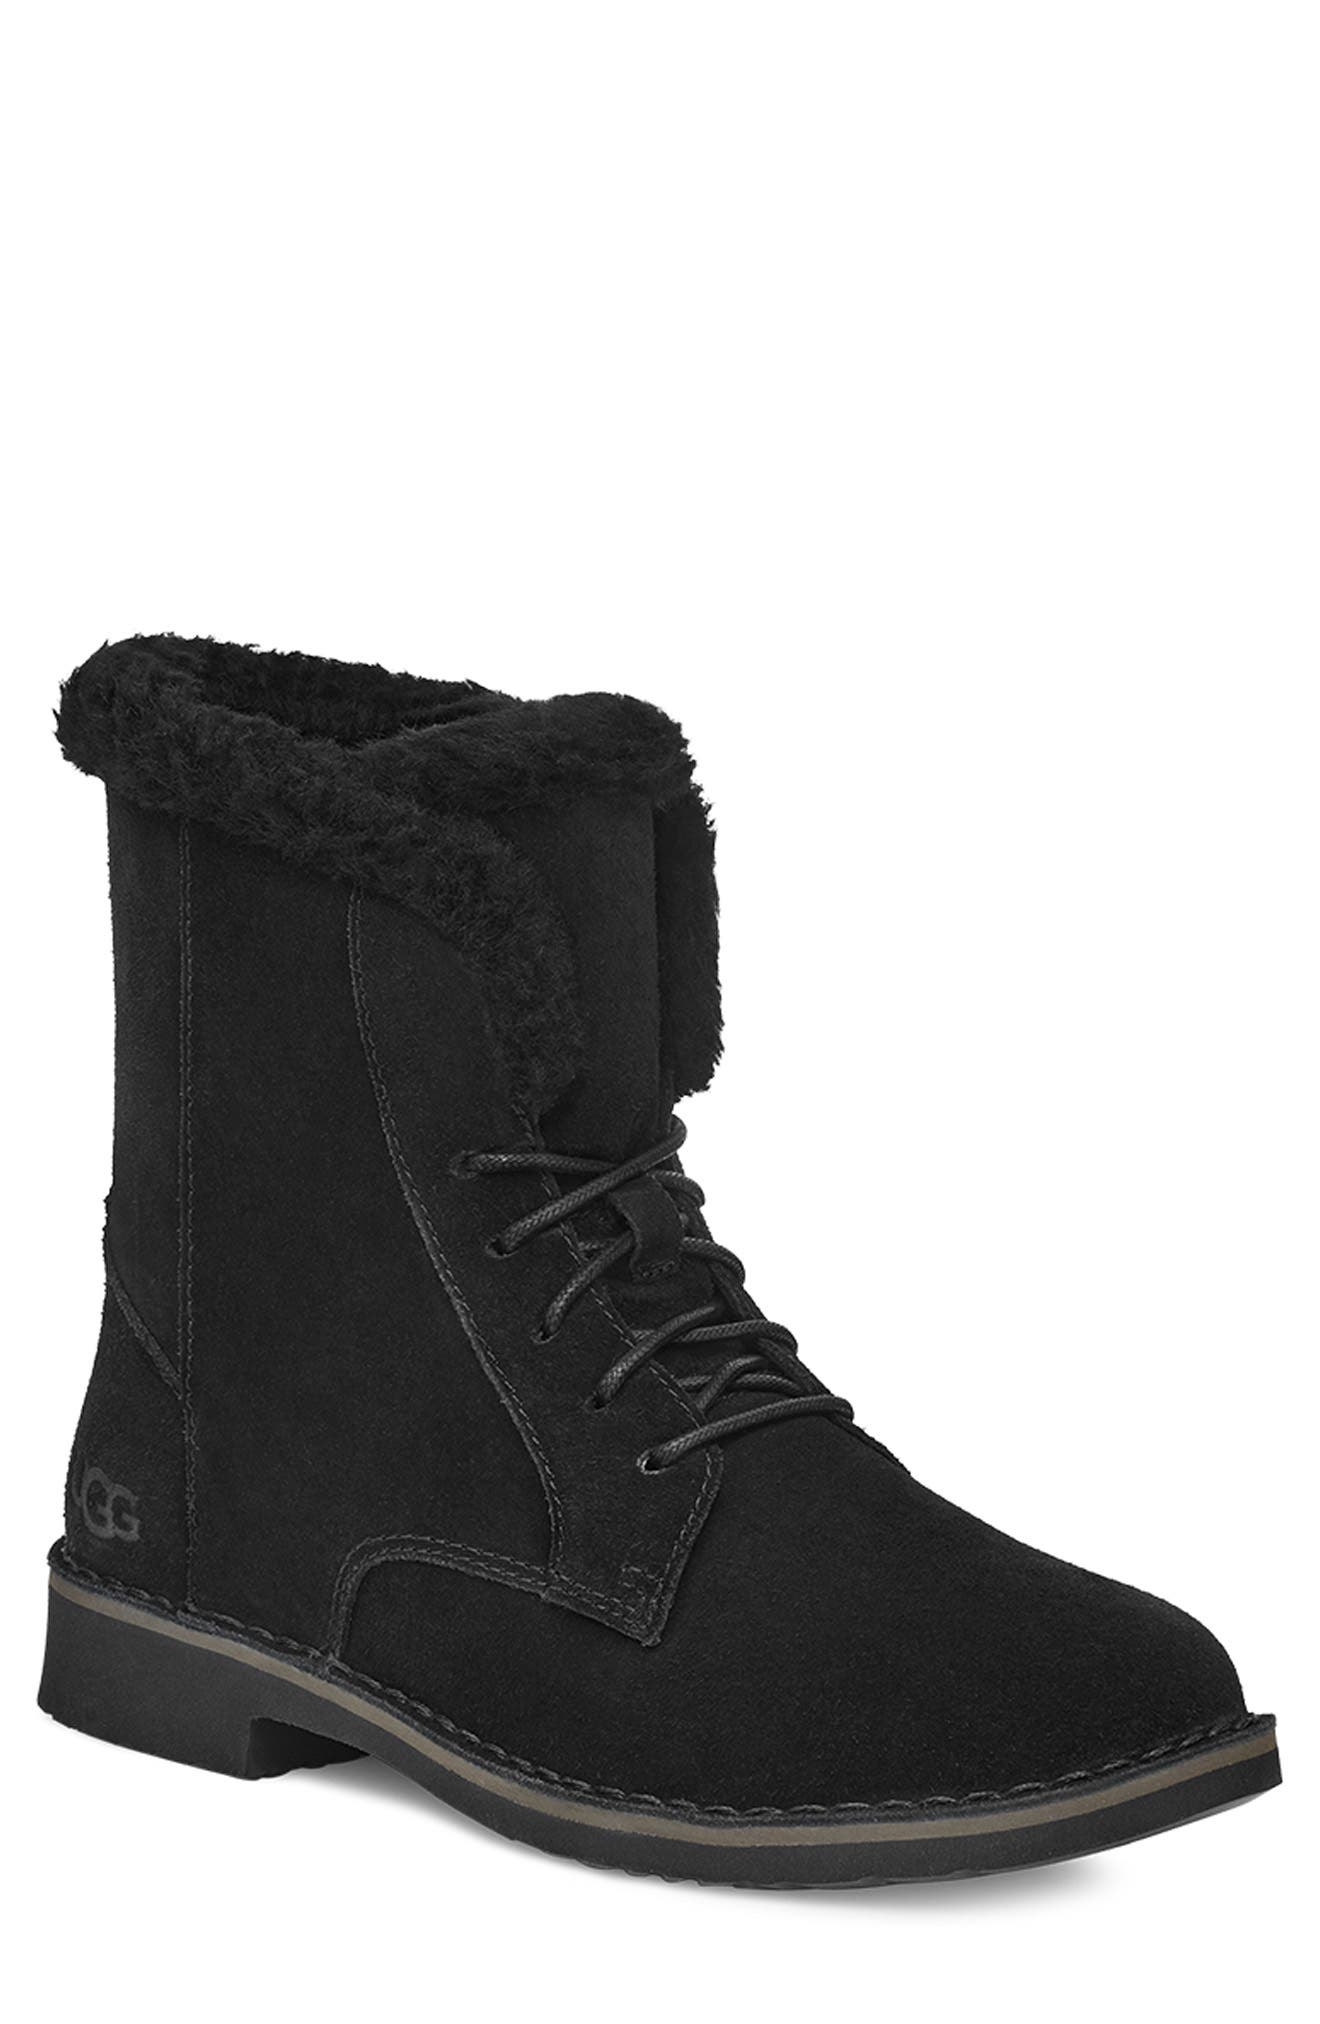 Vintage Boots- Winter Rain and Snow Boots History UGG UGG Quincy UGGplush Faux Shearling Lined Combat Boot in Black at Nordstrom Rack Size 11 $139.99 AT vintagedancer.com